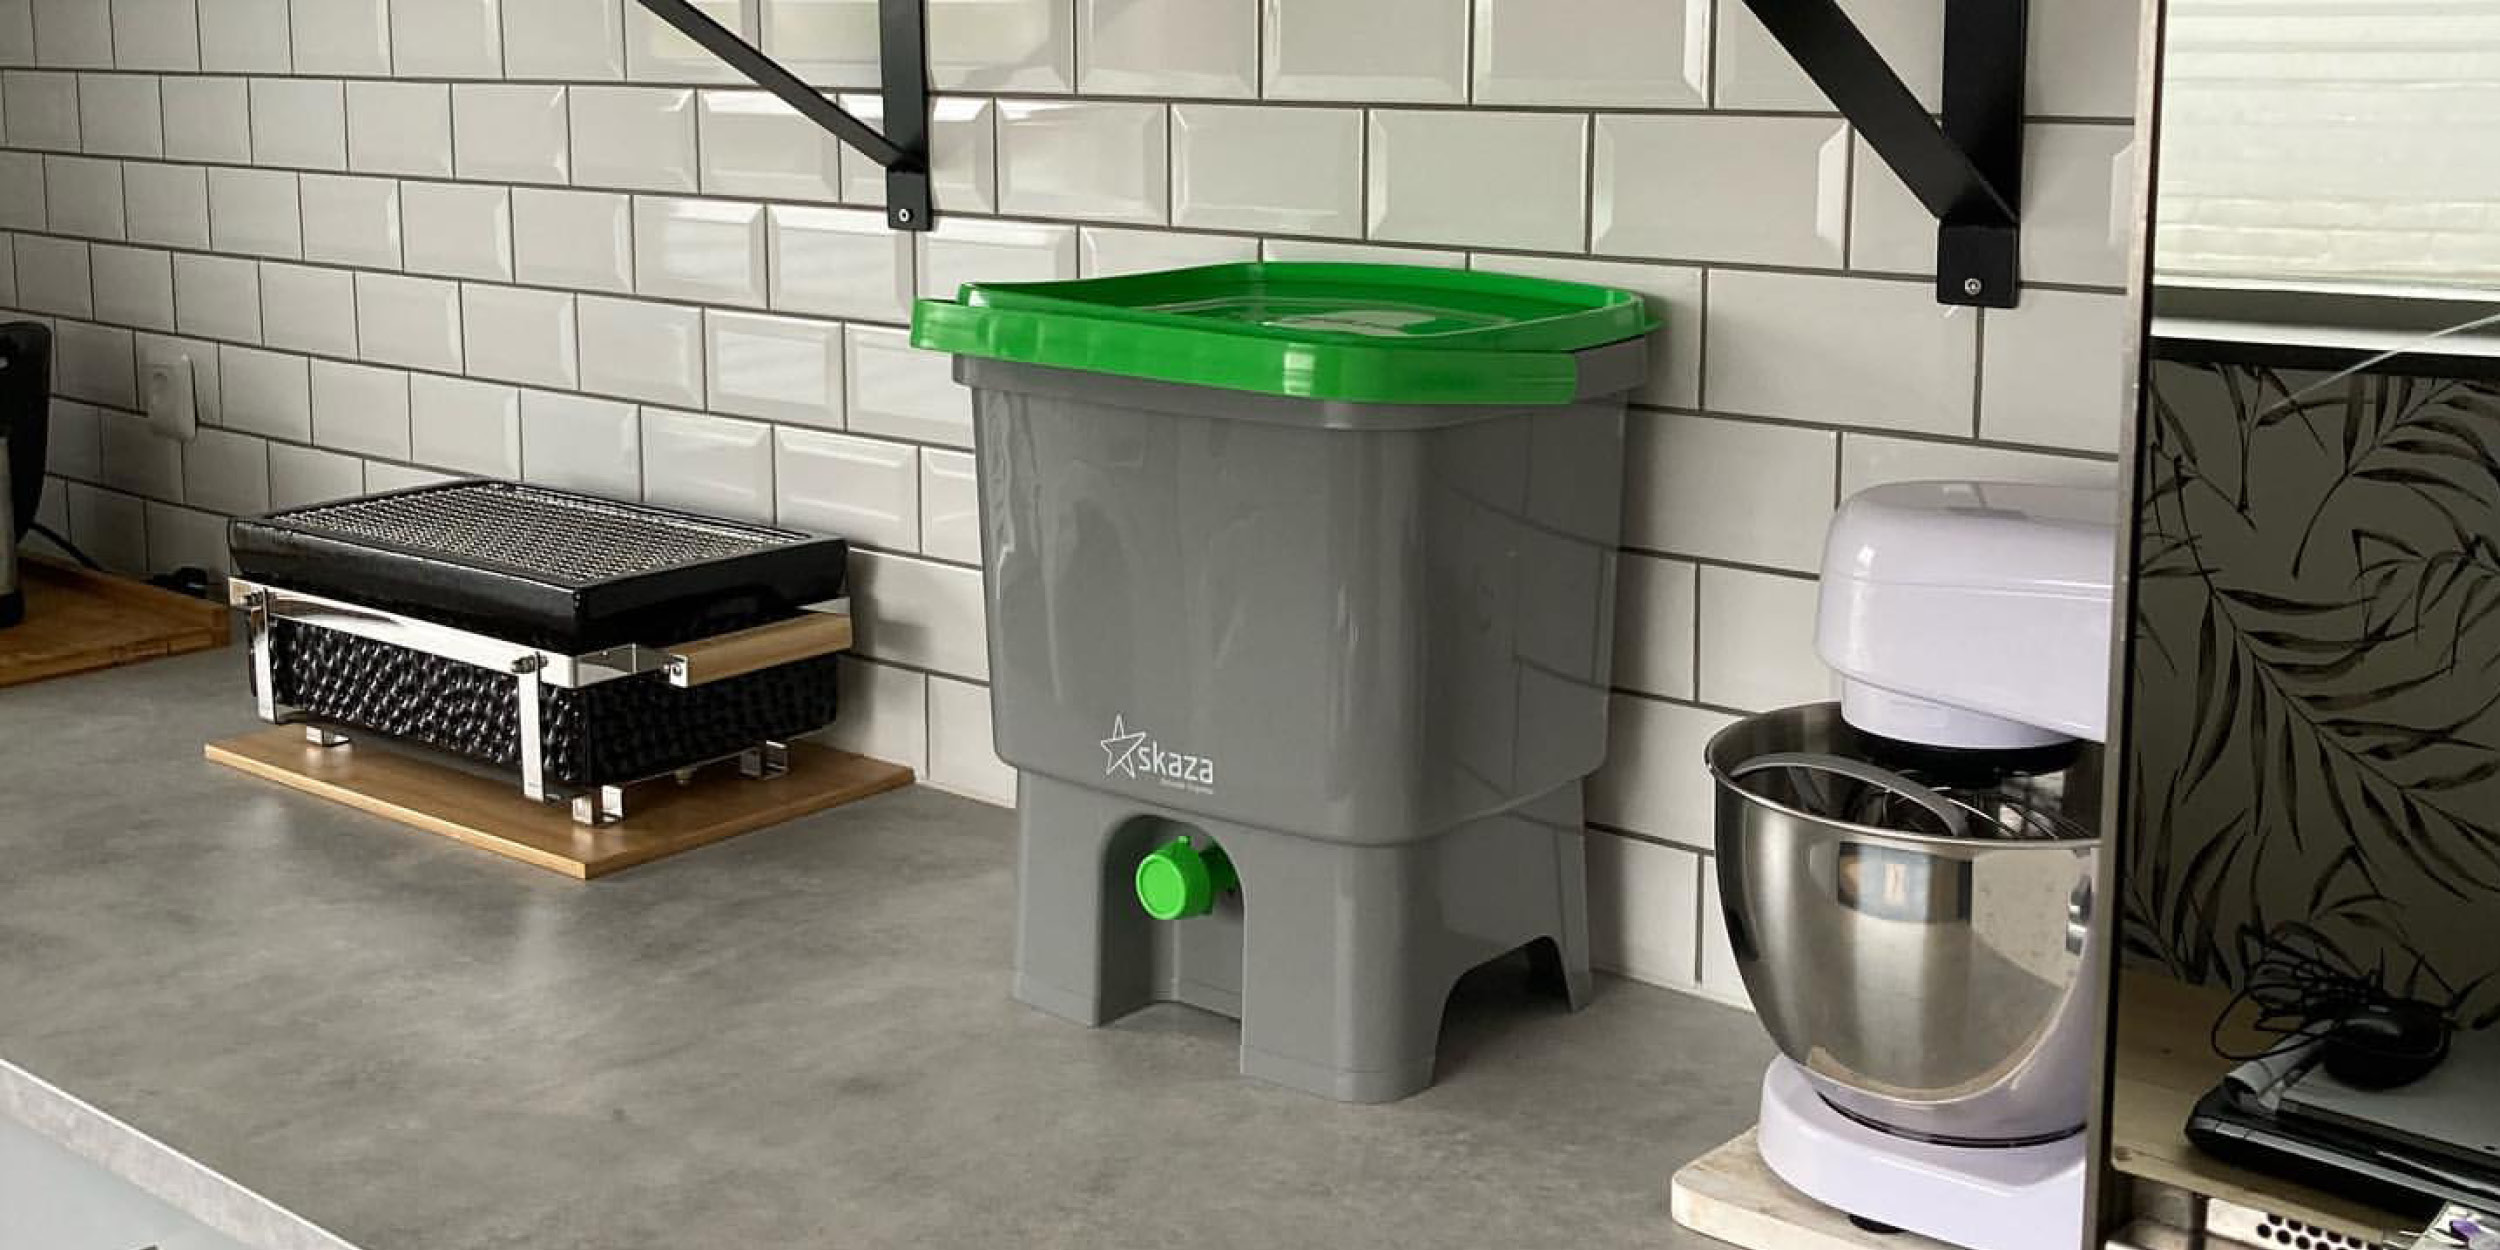 https://bokashiorganko.com/hs-fs/hubfs/An%20urban%20composter%20is%20appropriate%20for%20apartment%20living.jpg?width=2500&name=An%20urban%20composter%20is%20appropriate%20for%20apartment%20living.jpg